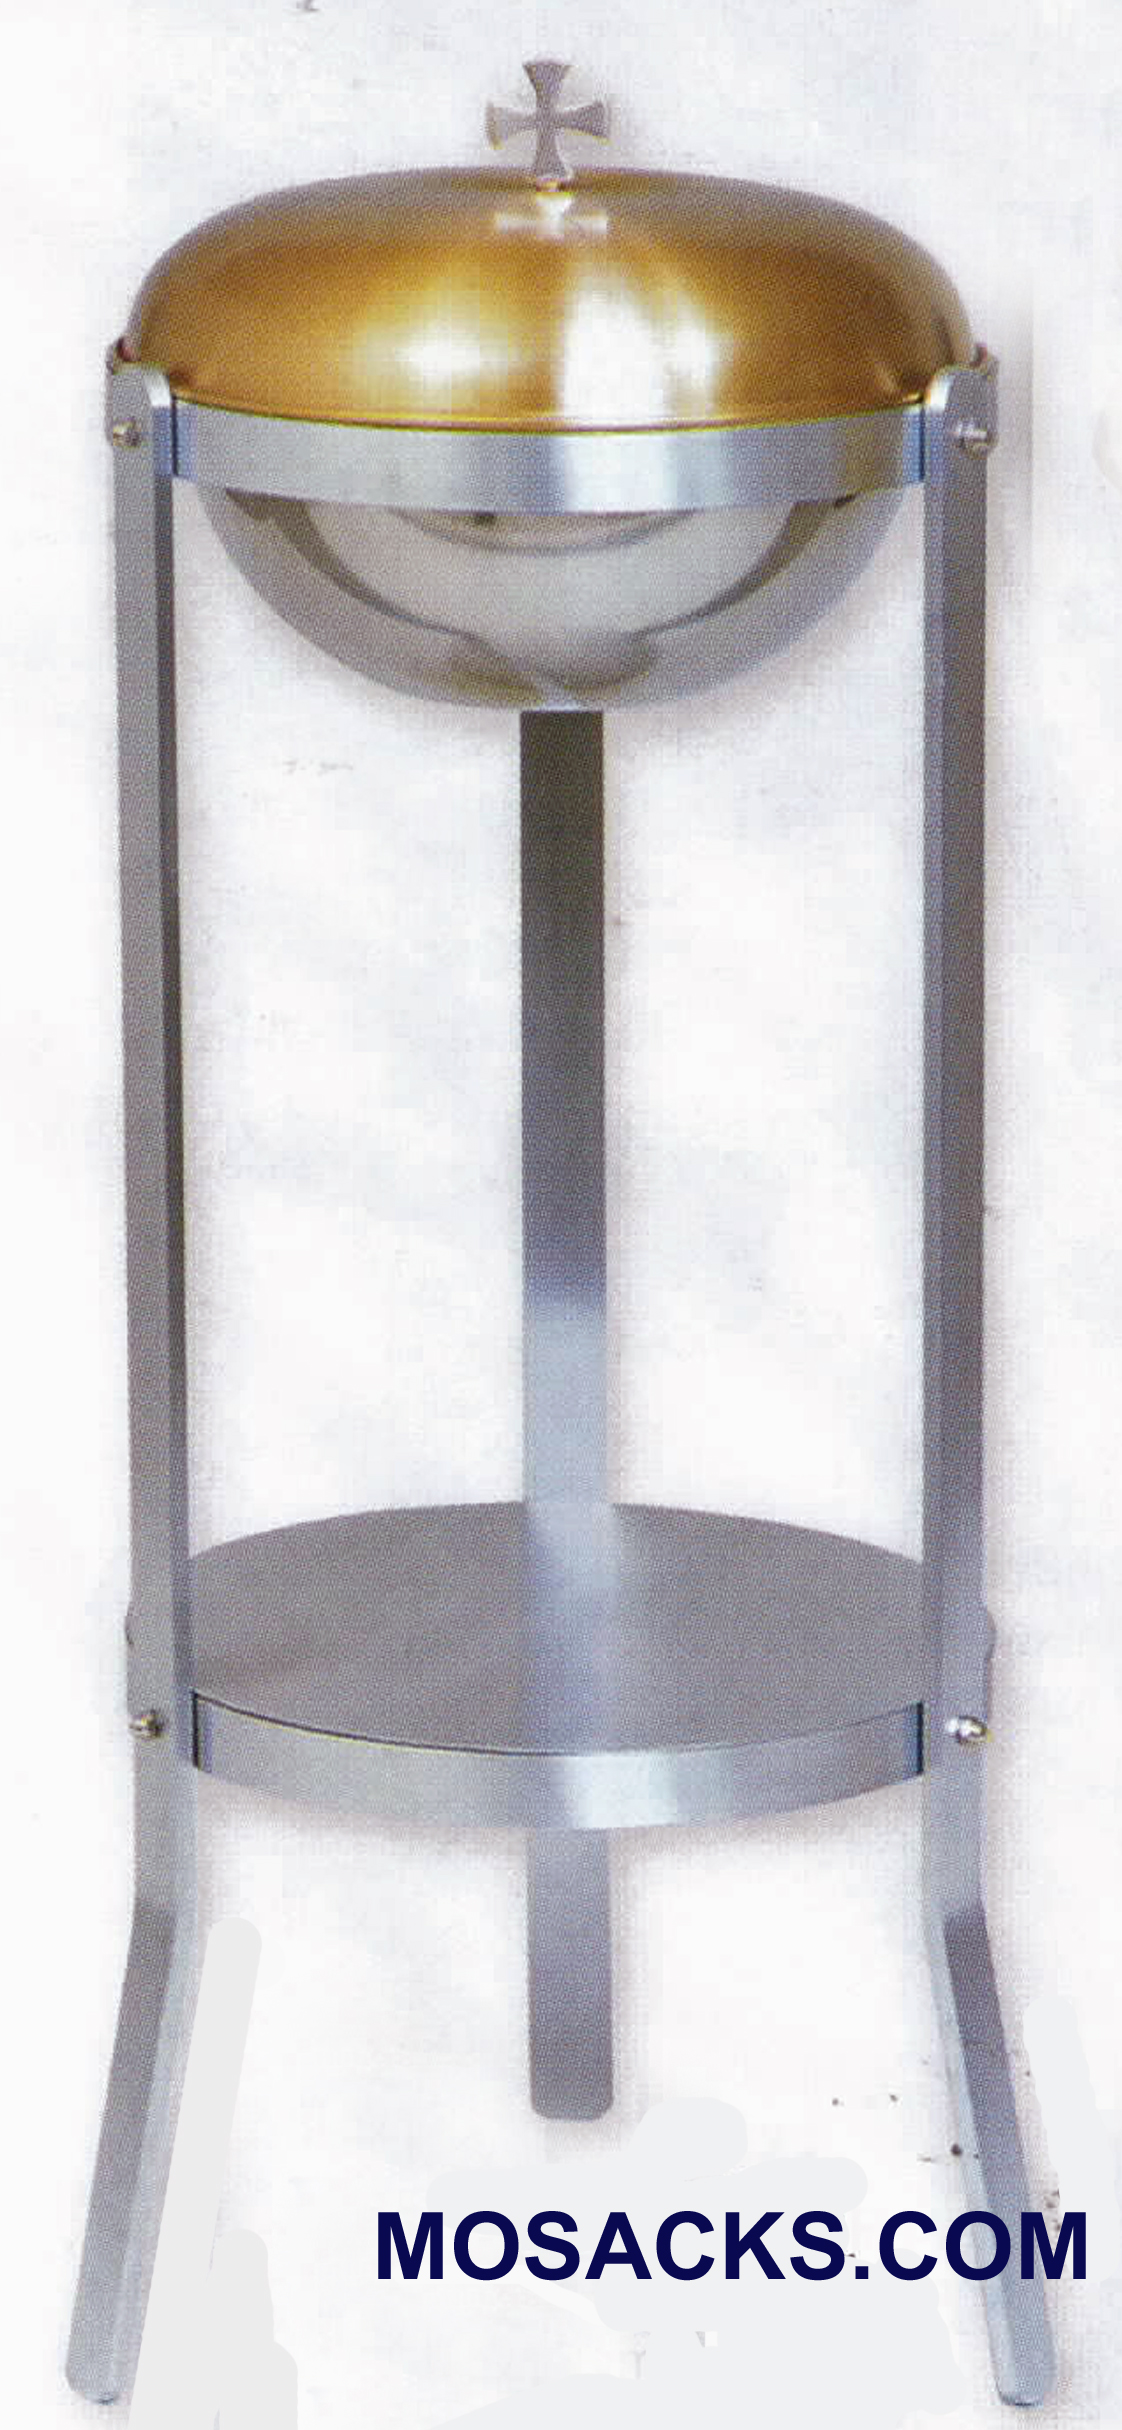 Portable Baptismal Font with Stainless Steel Baptismal Bowl, Bronze Baptismal Cover and Aluminum Stand - K300